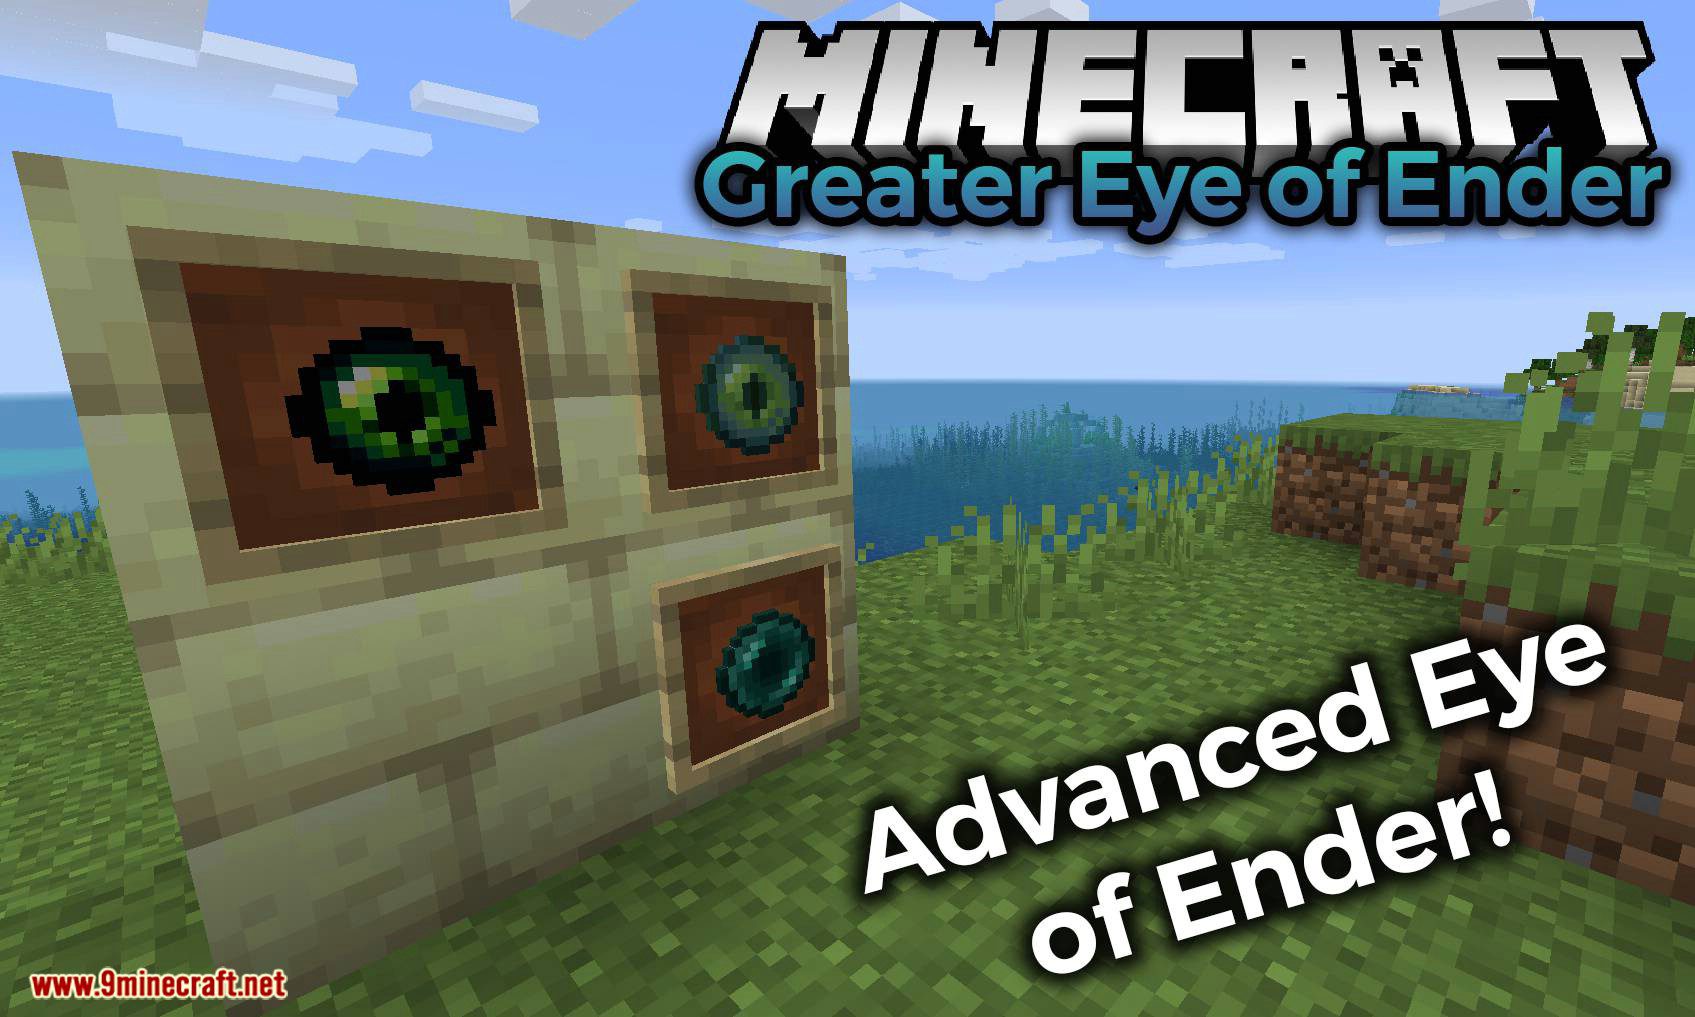 How to Make an Eye of Ender in Minecraft & How to Use